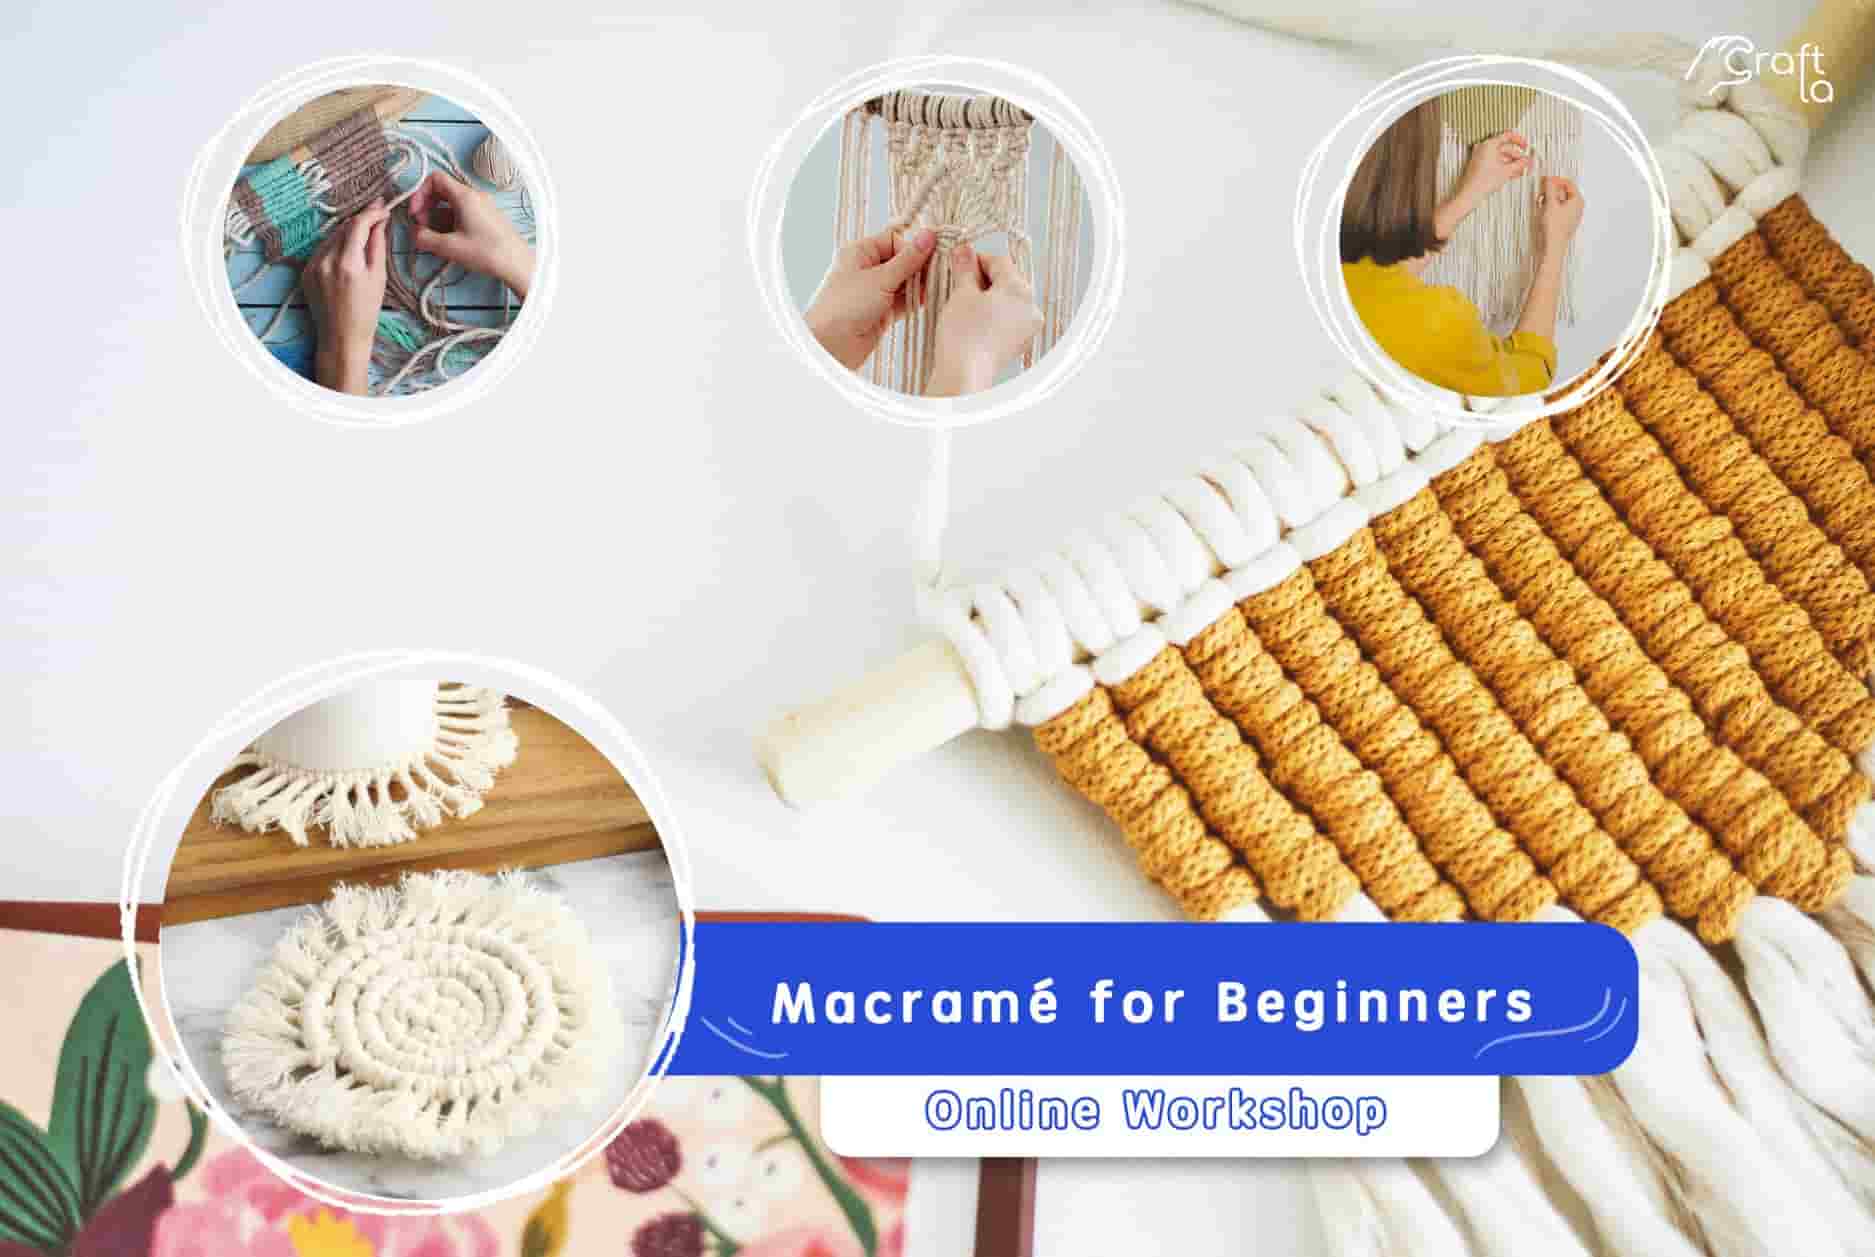 Online Macrame Course Malaysia: New Hobby from the Comfort of Your Home